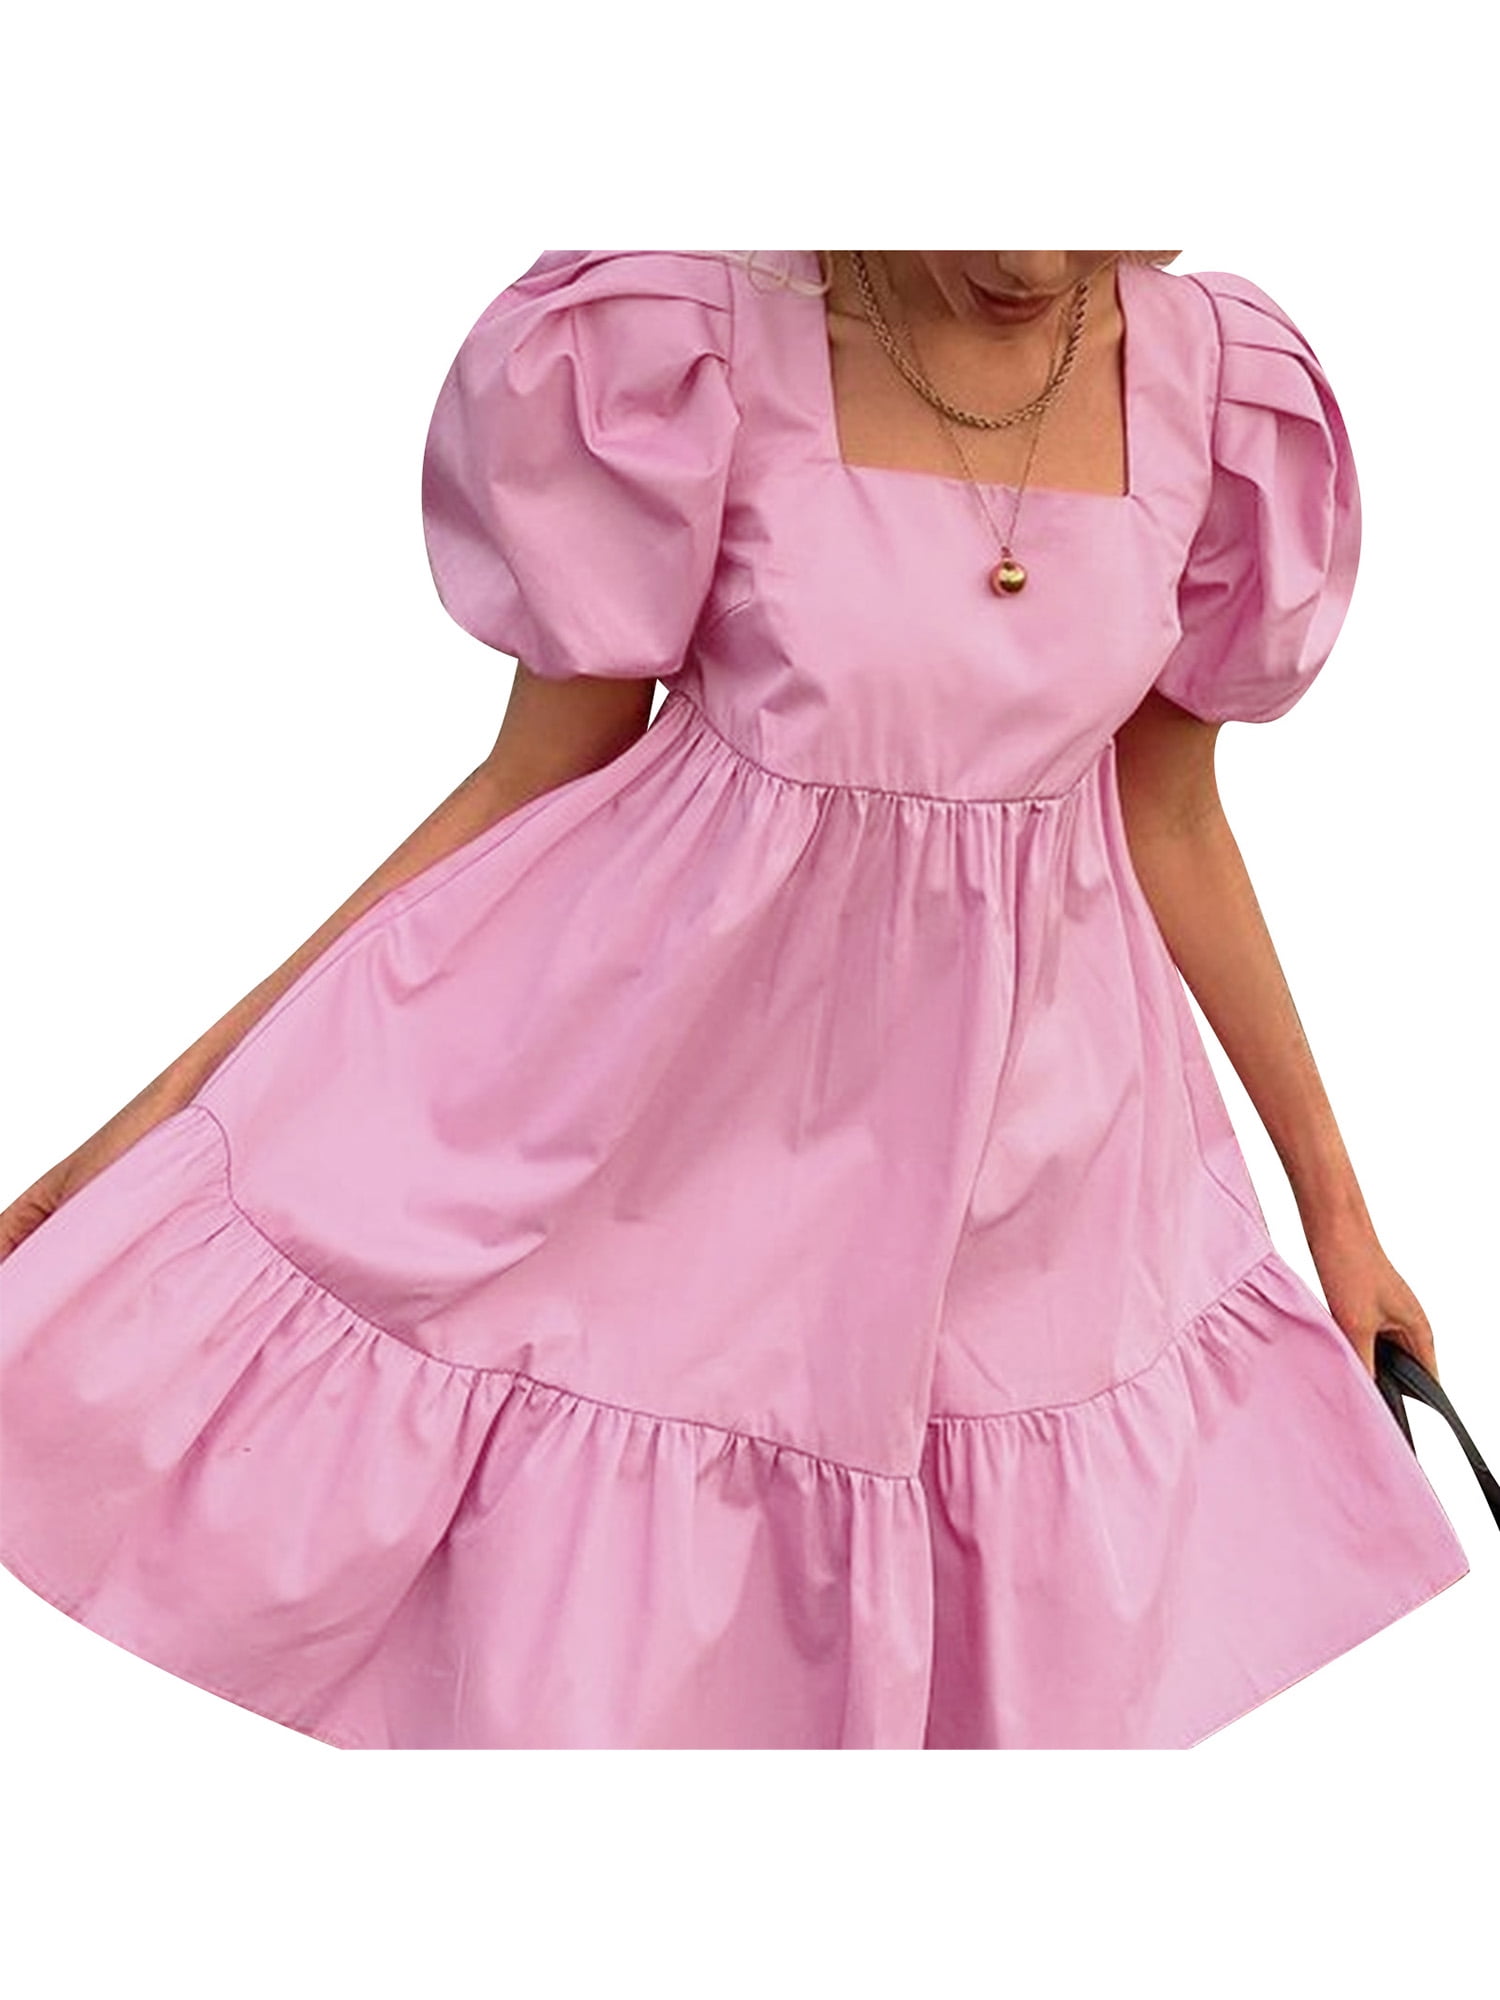 ADULT BABY SISSY PEACH SATIN PRETTY FRILLY  DRESS 52"  PUFFED SLEEVES 